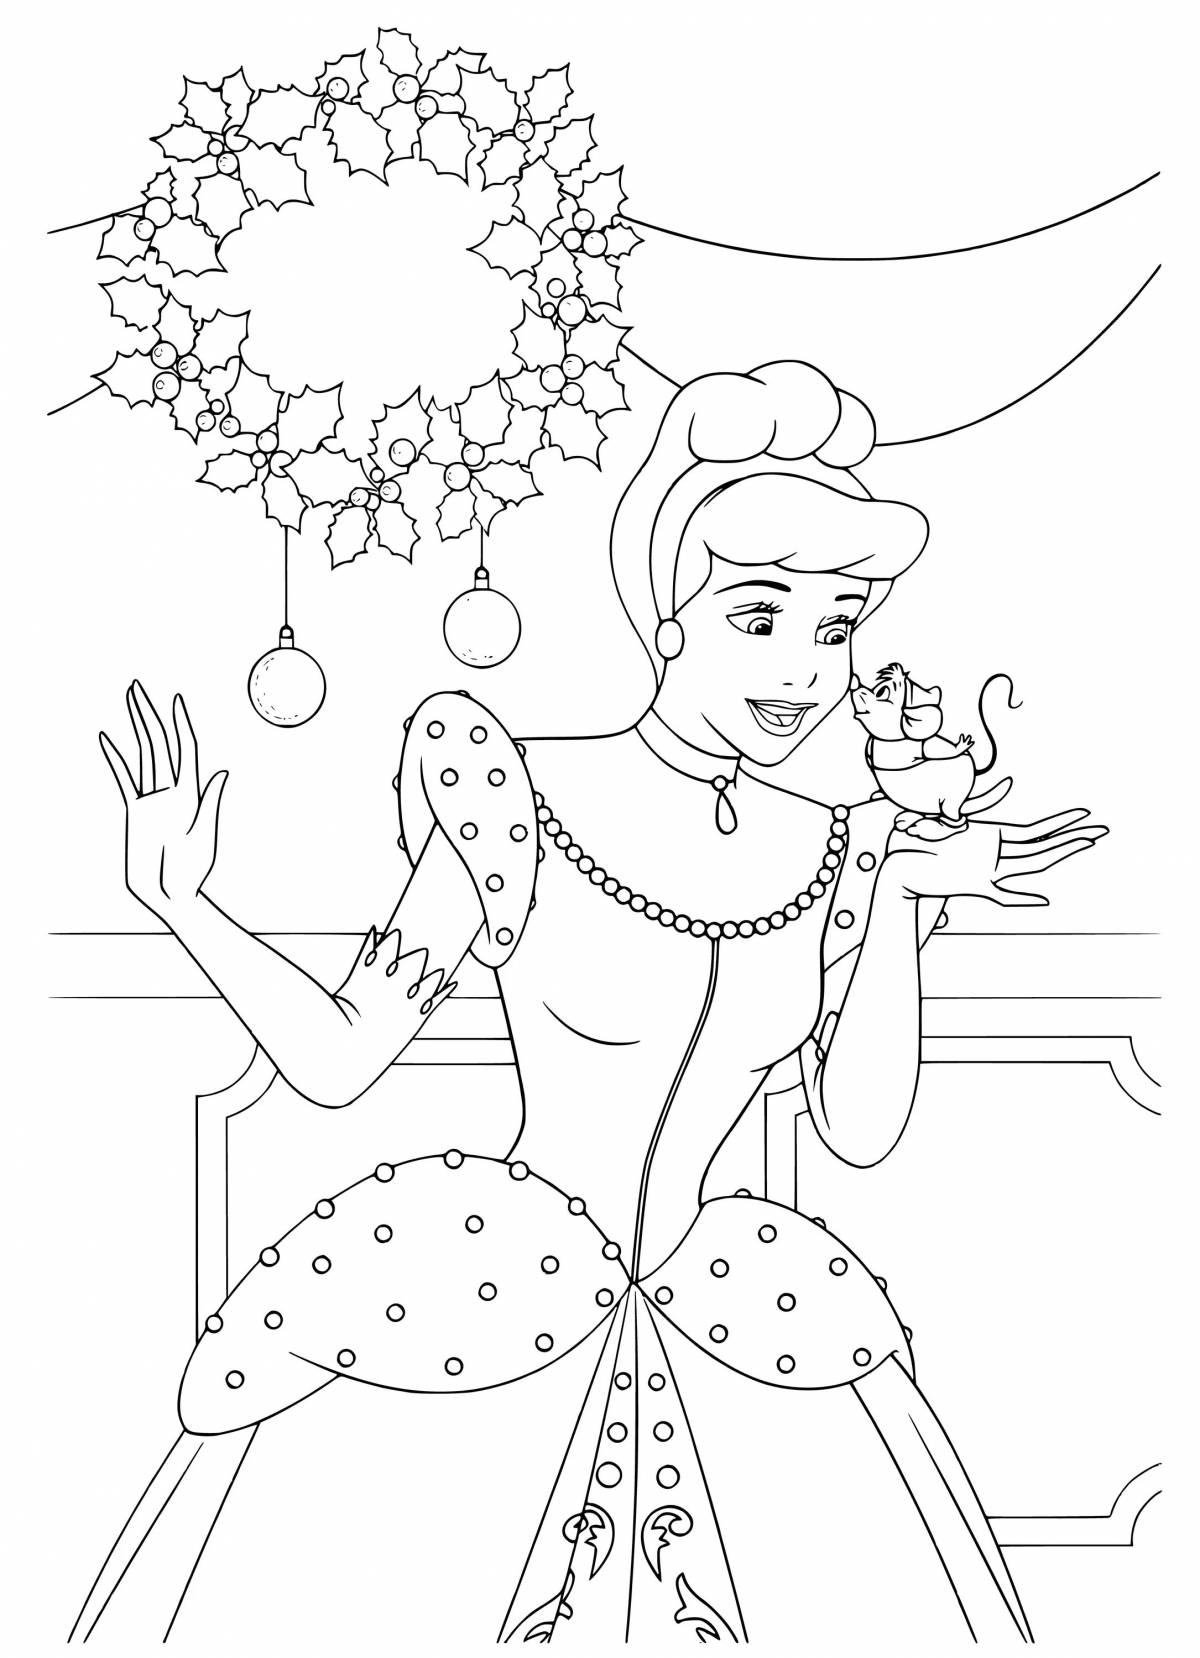 Charming princess coloring pages new